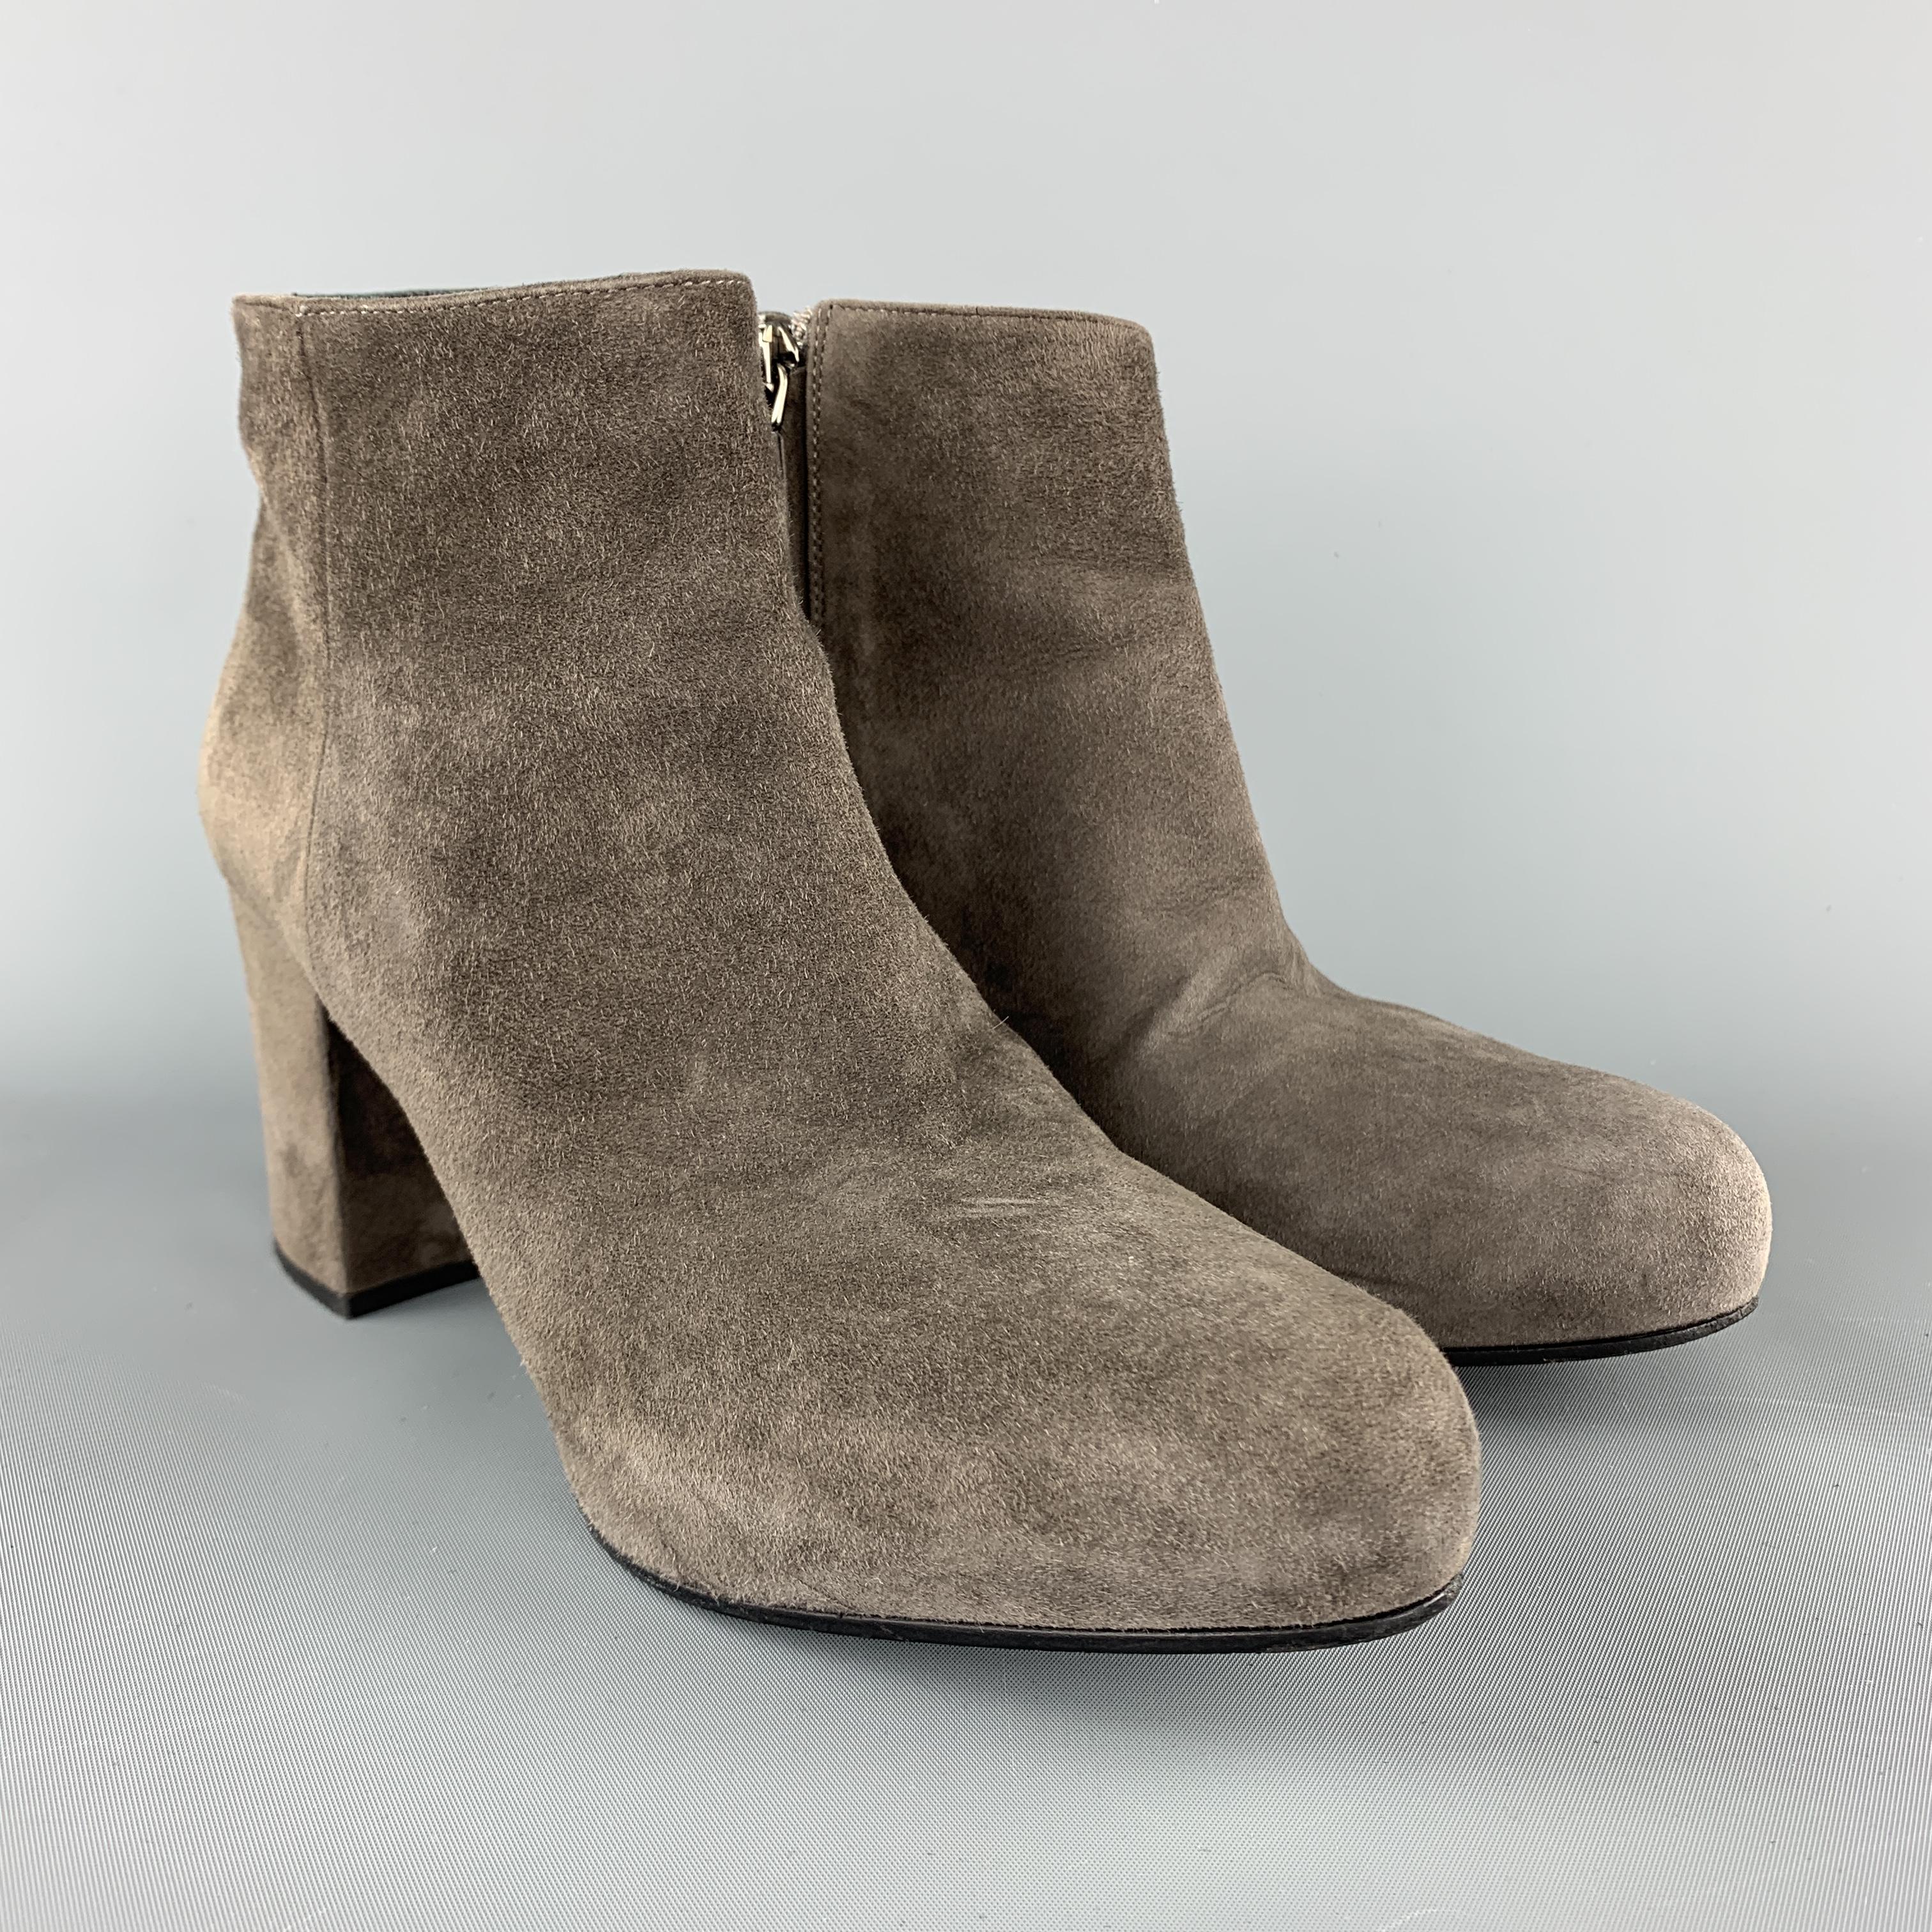 PRADA ankle booties come in grey suede with a hidden platform pointed toe and chunky covered heel. Made in Italy.

Good Pre-Owned Condition.
Marked: IT 36

Measurements:

Heel: 3 in.
Platform: 0.75 in.